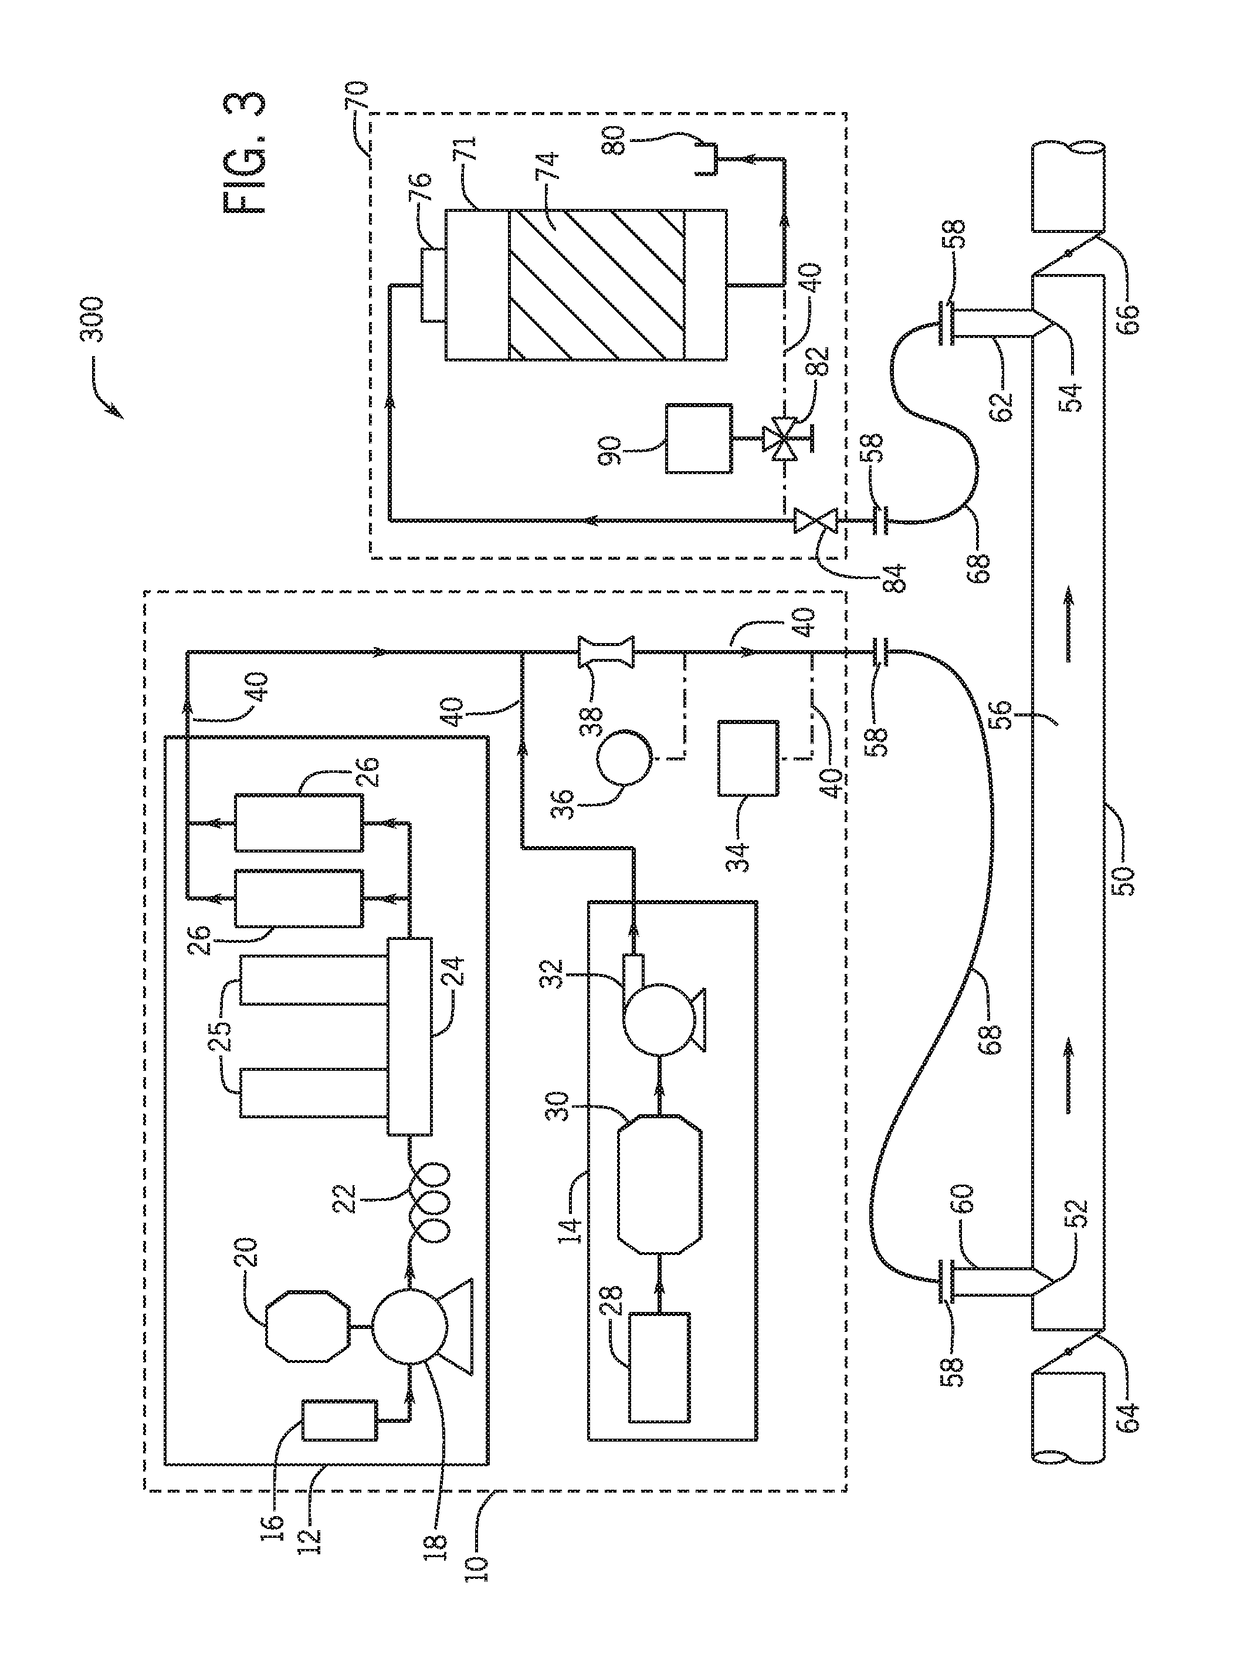 Apparatus for Ozone Gas Disinfection of Closed Conduits